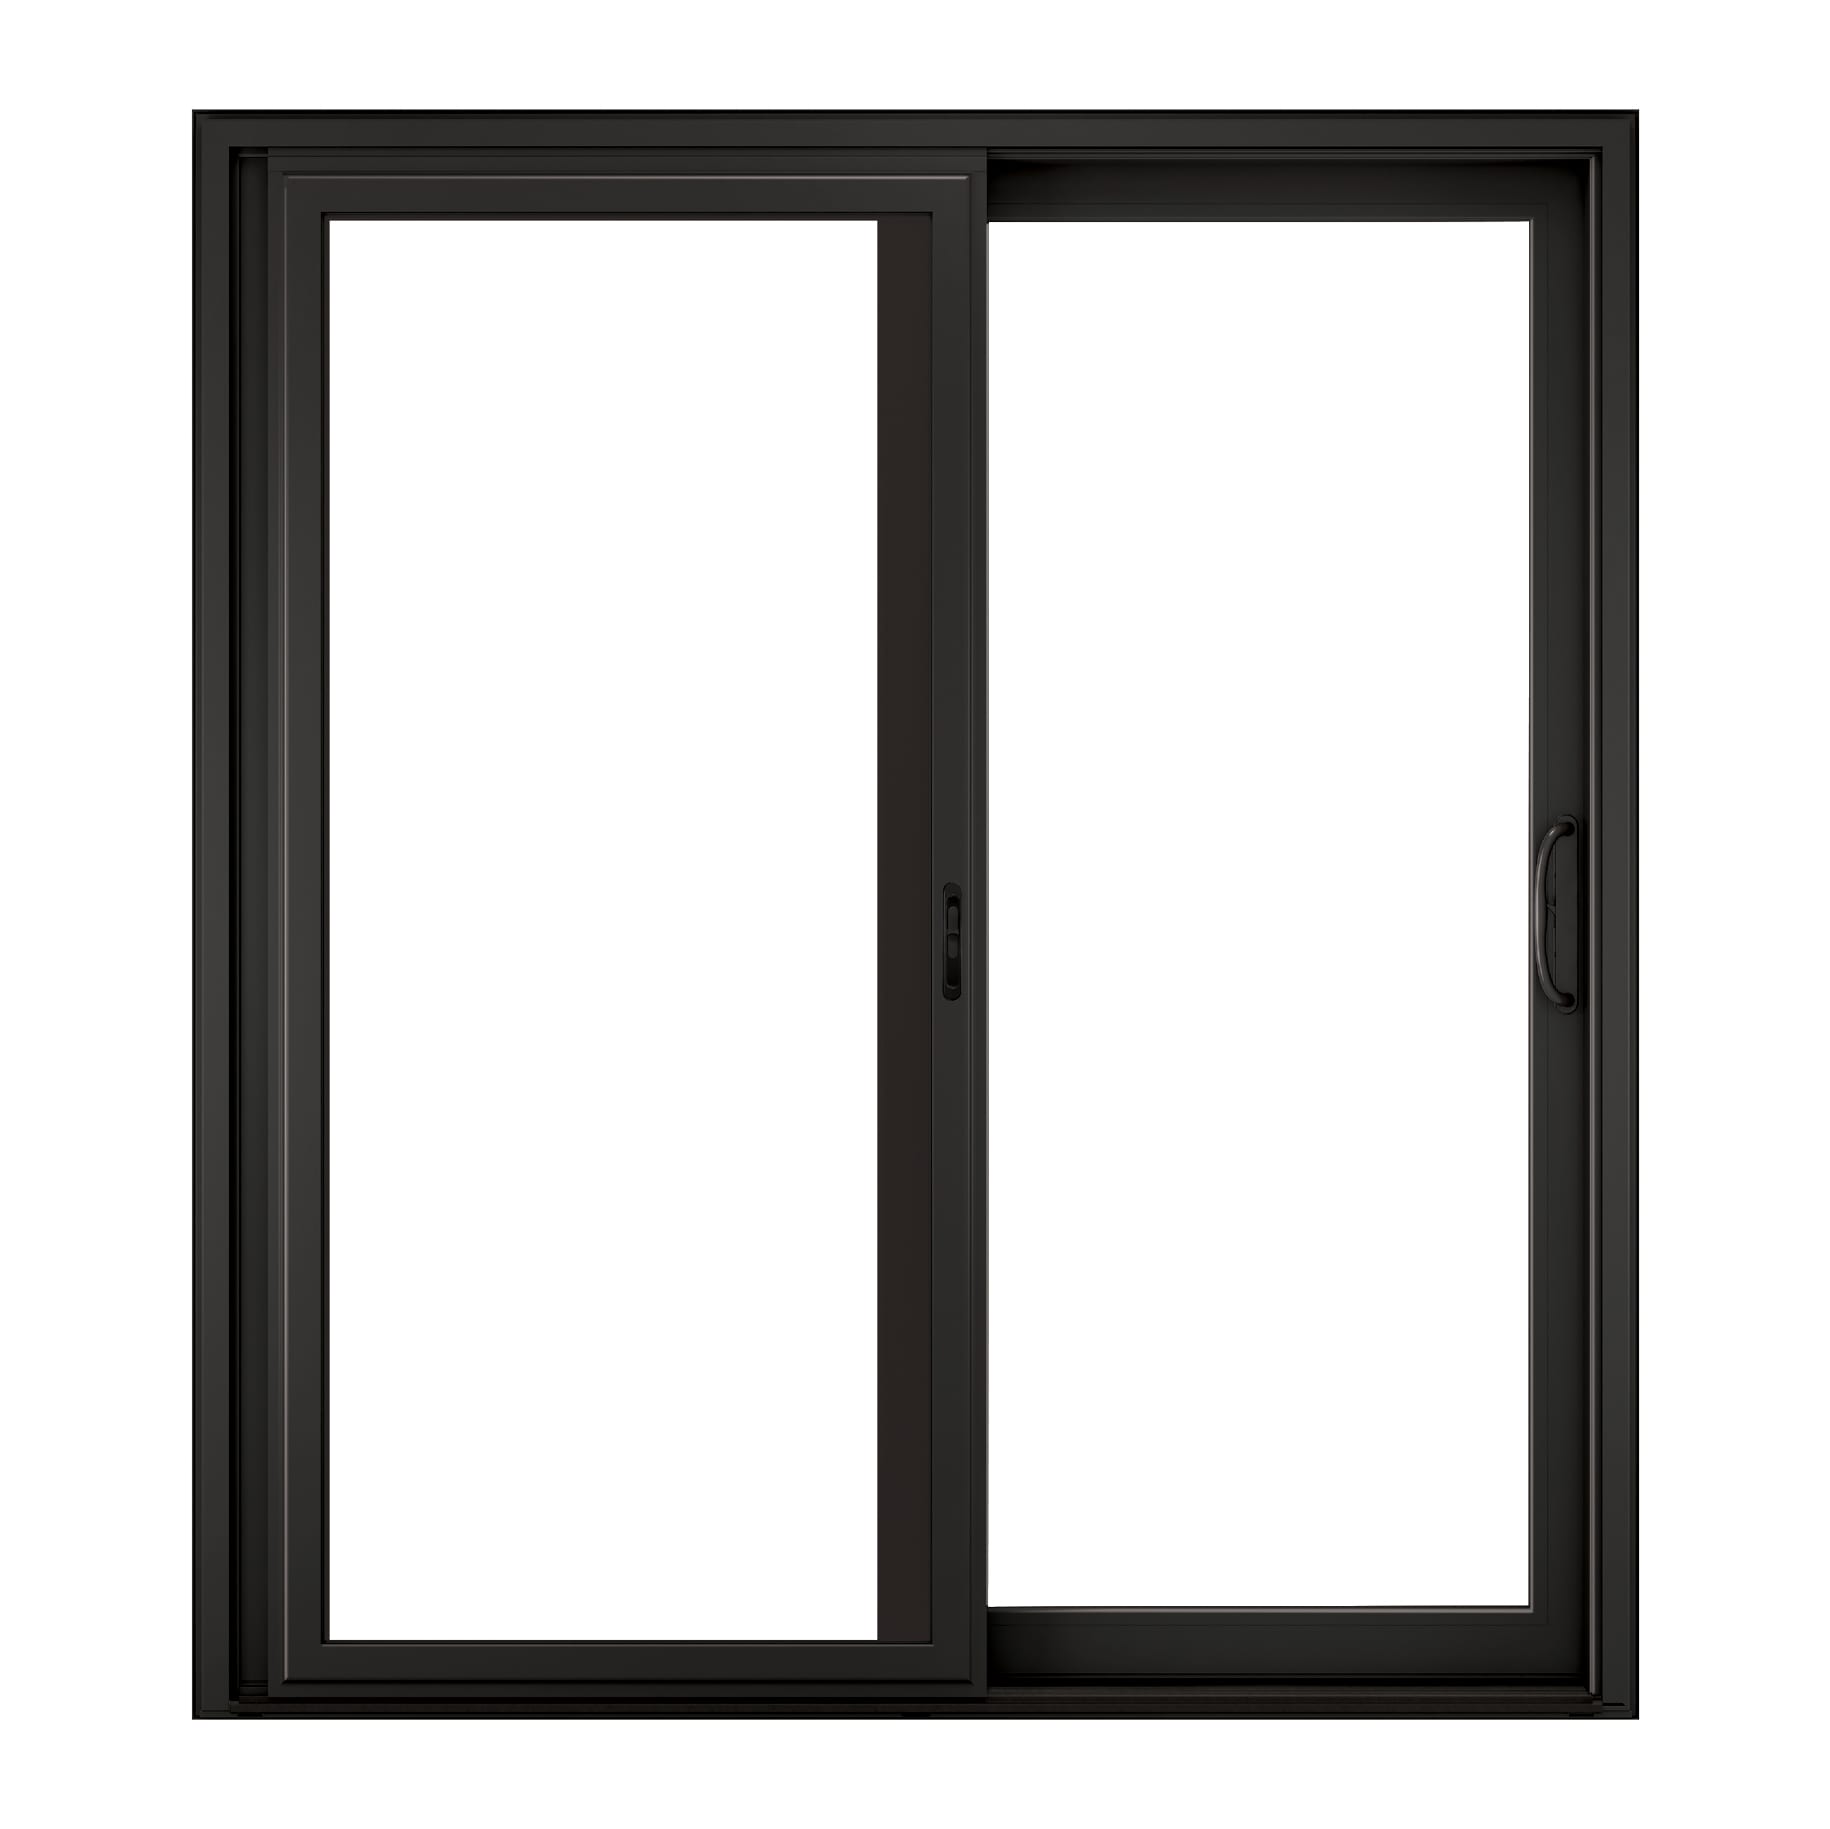 What is Affordable Price High Quality Finish Sliding Door Built in